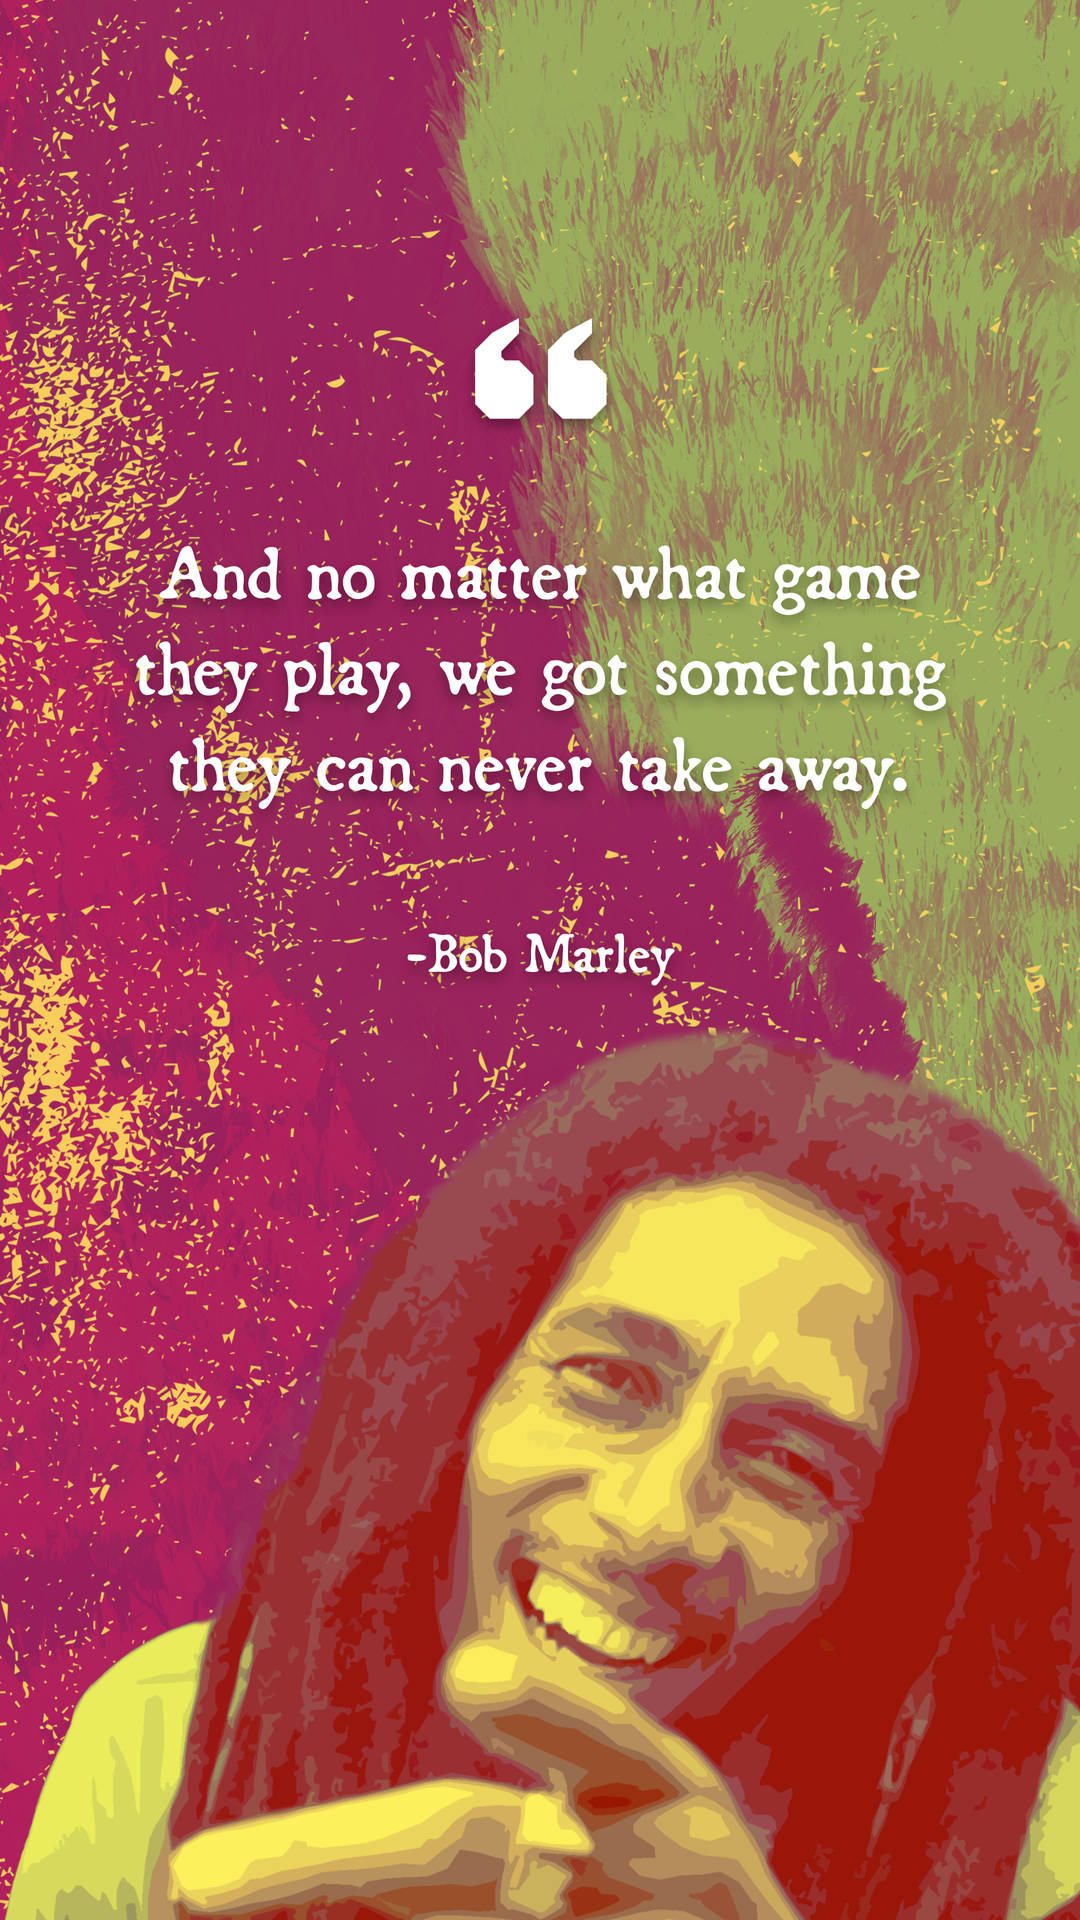 Bob Marley Never Take Away Quote Wallpaper